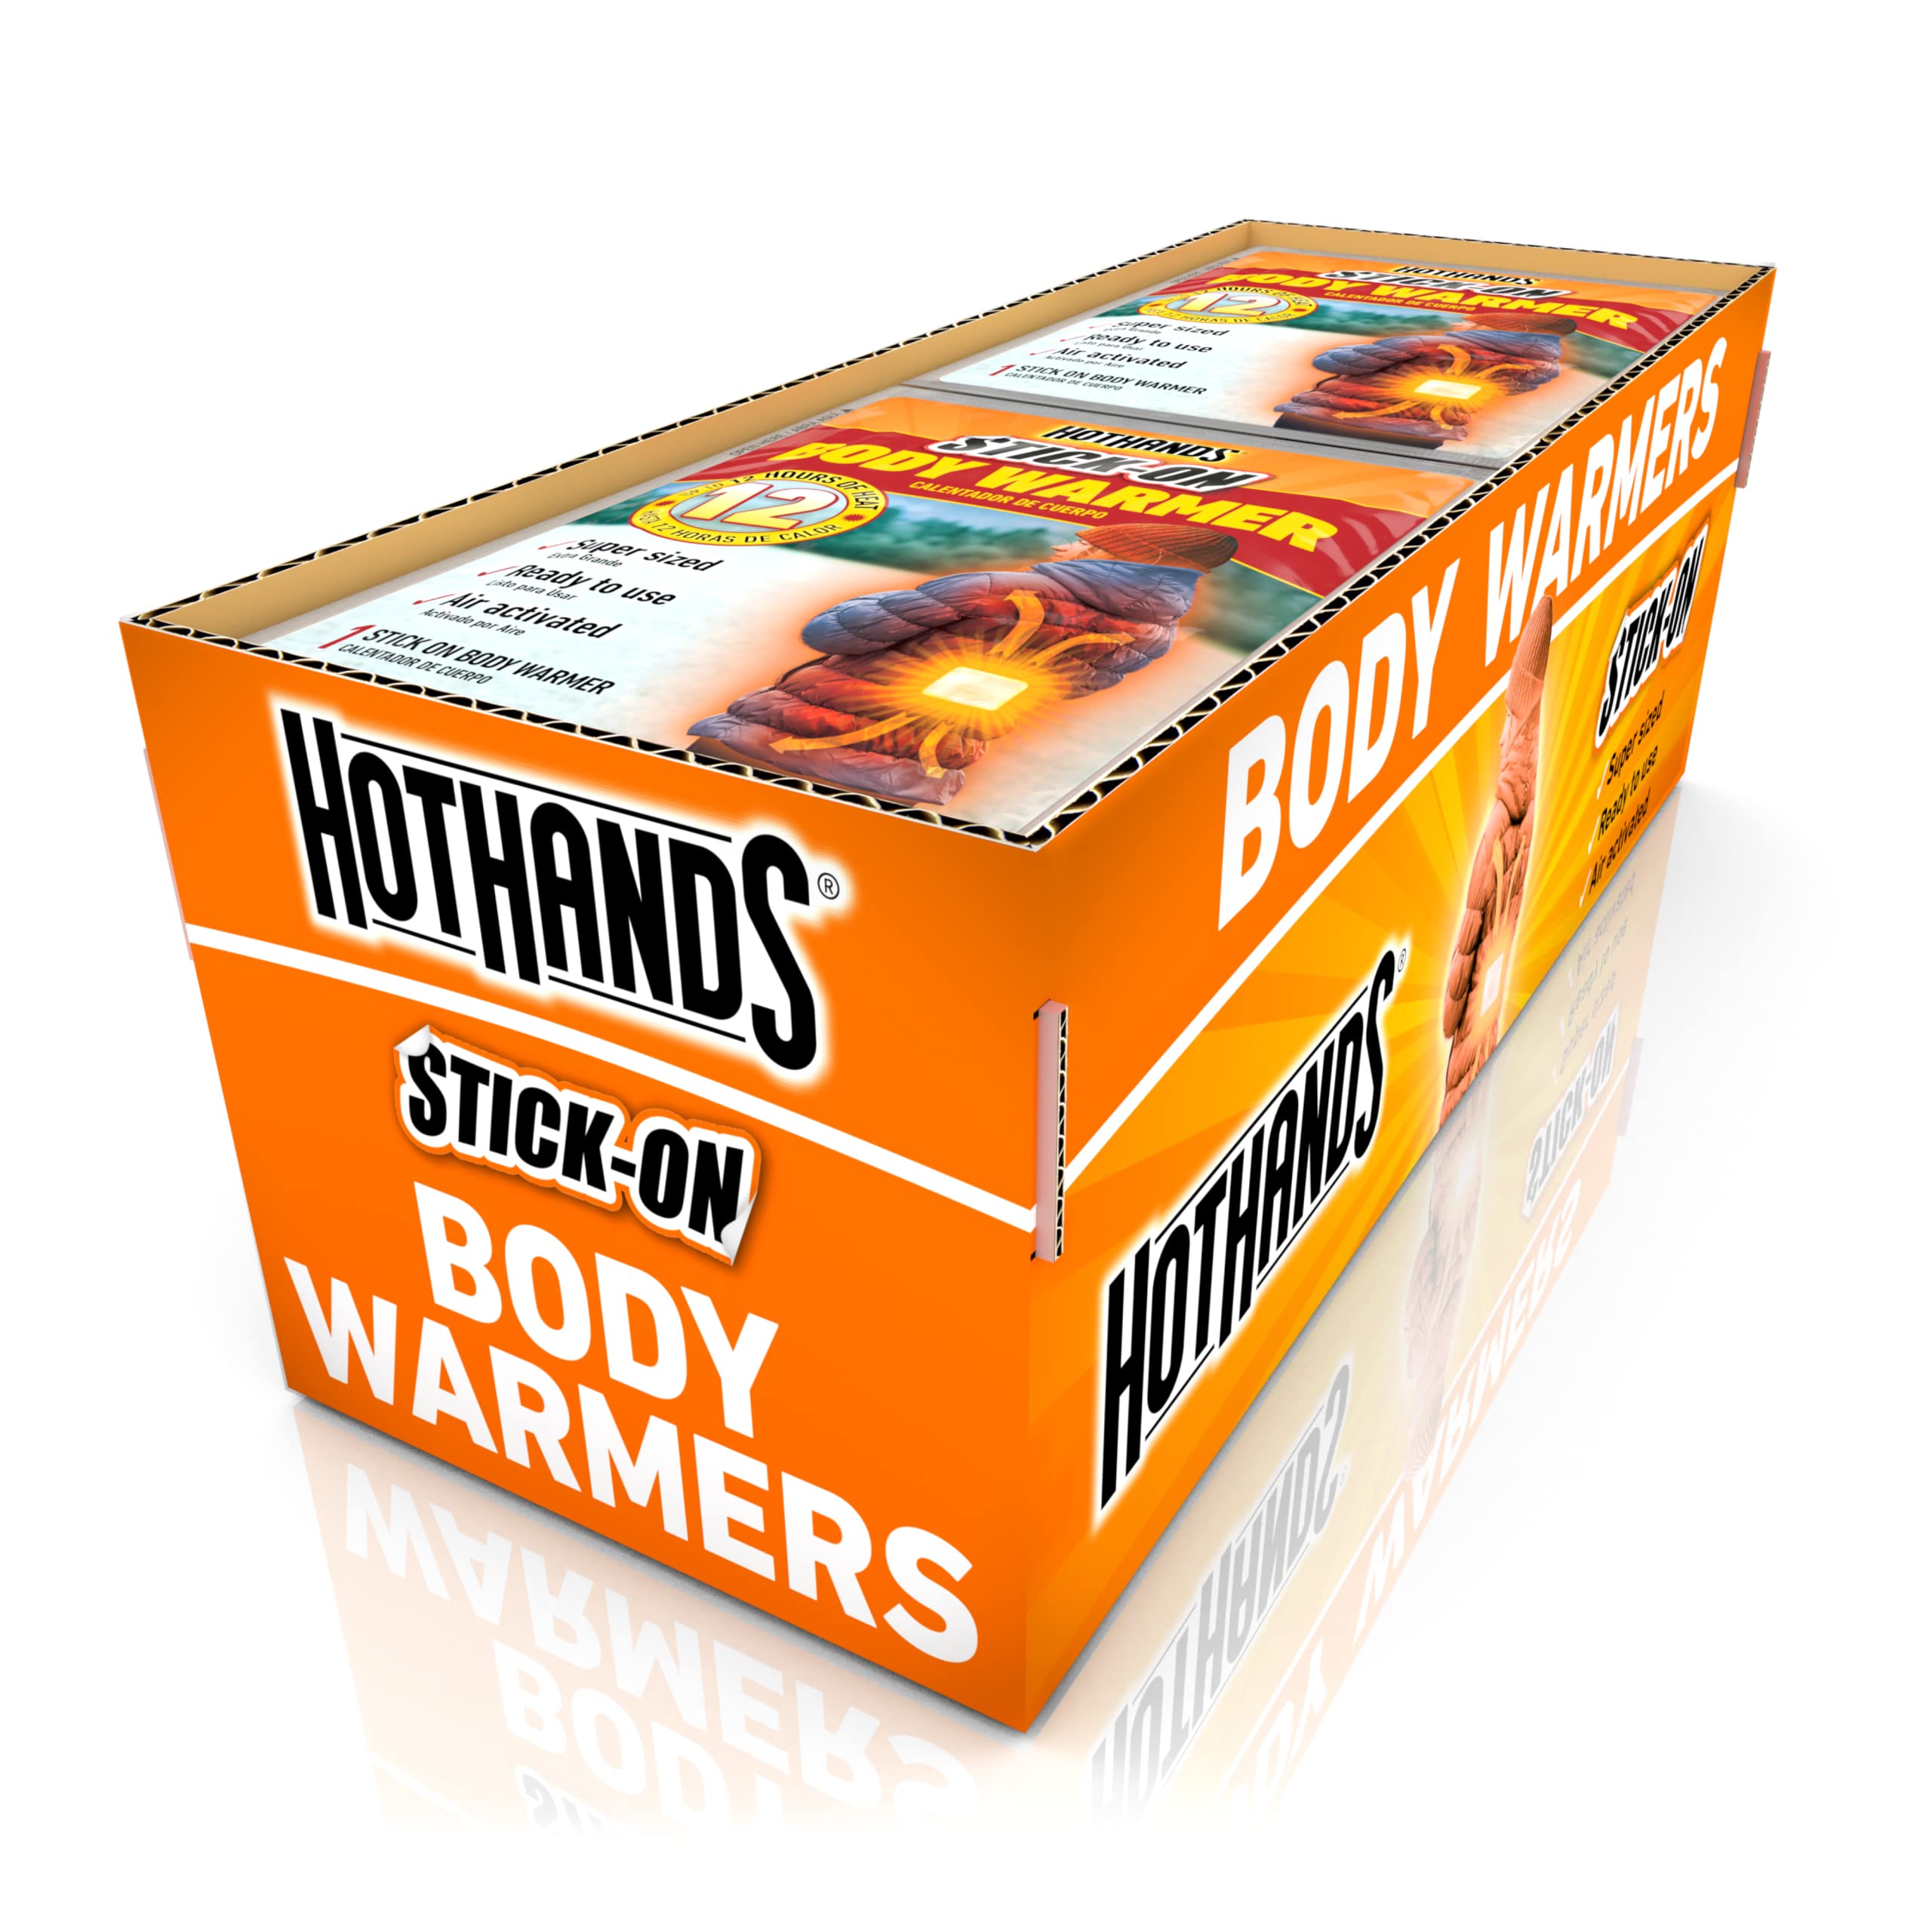 HotHands Body Warmers with Adhesive - Long Lasting Safe Natural Odorless Air Activated Warmers - Up to 12 Hours of Heat - 40 Individual Warmers